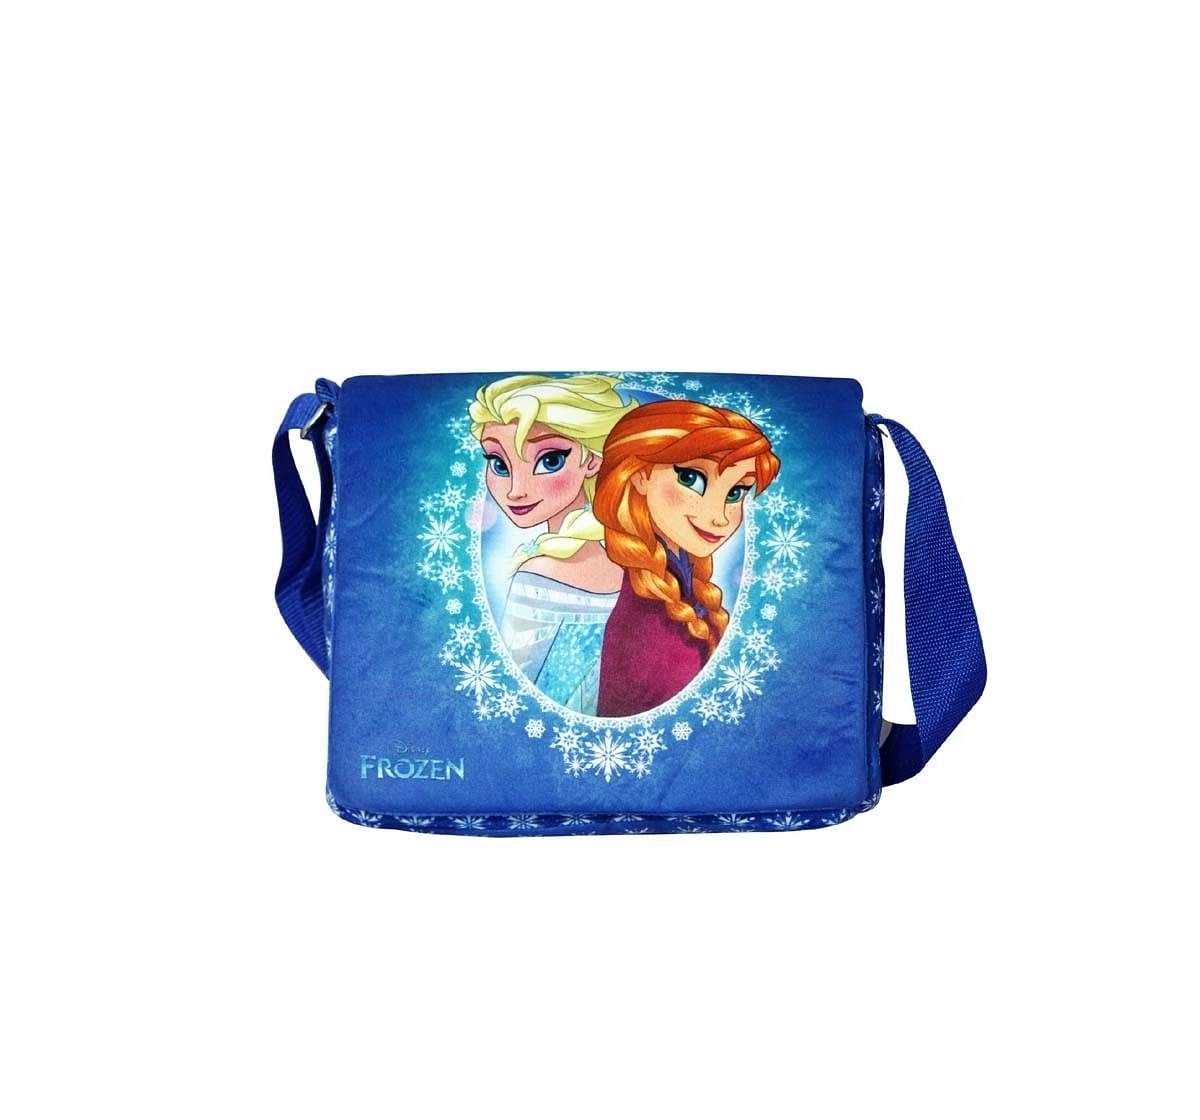 Marvel Blue Happiness Zipper Closure Frozen Princess Printed Sling Bag with Accessories for Kids age 12M+